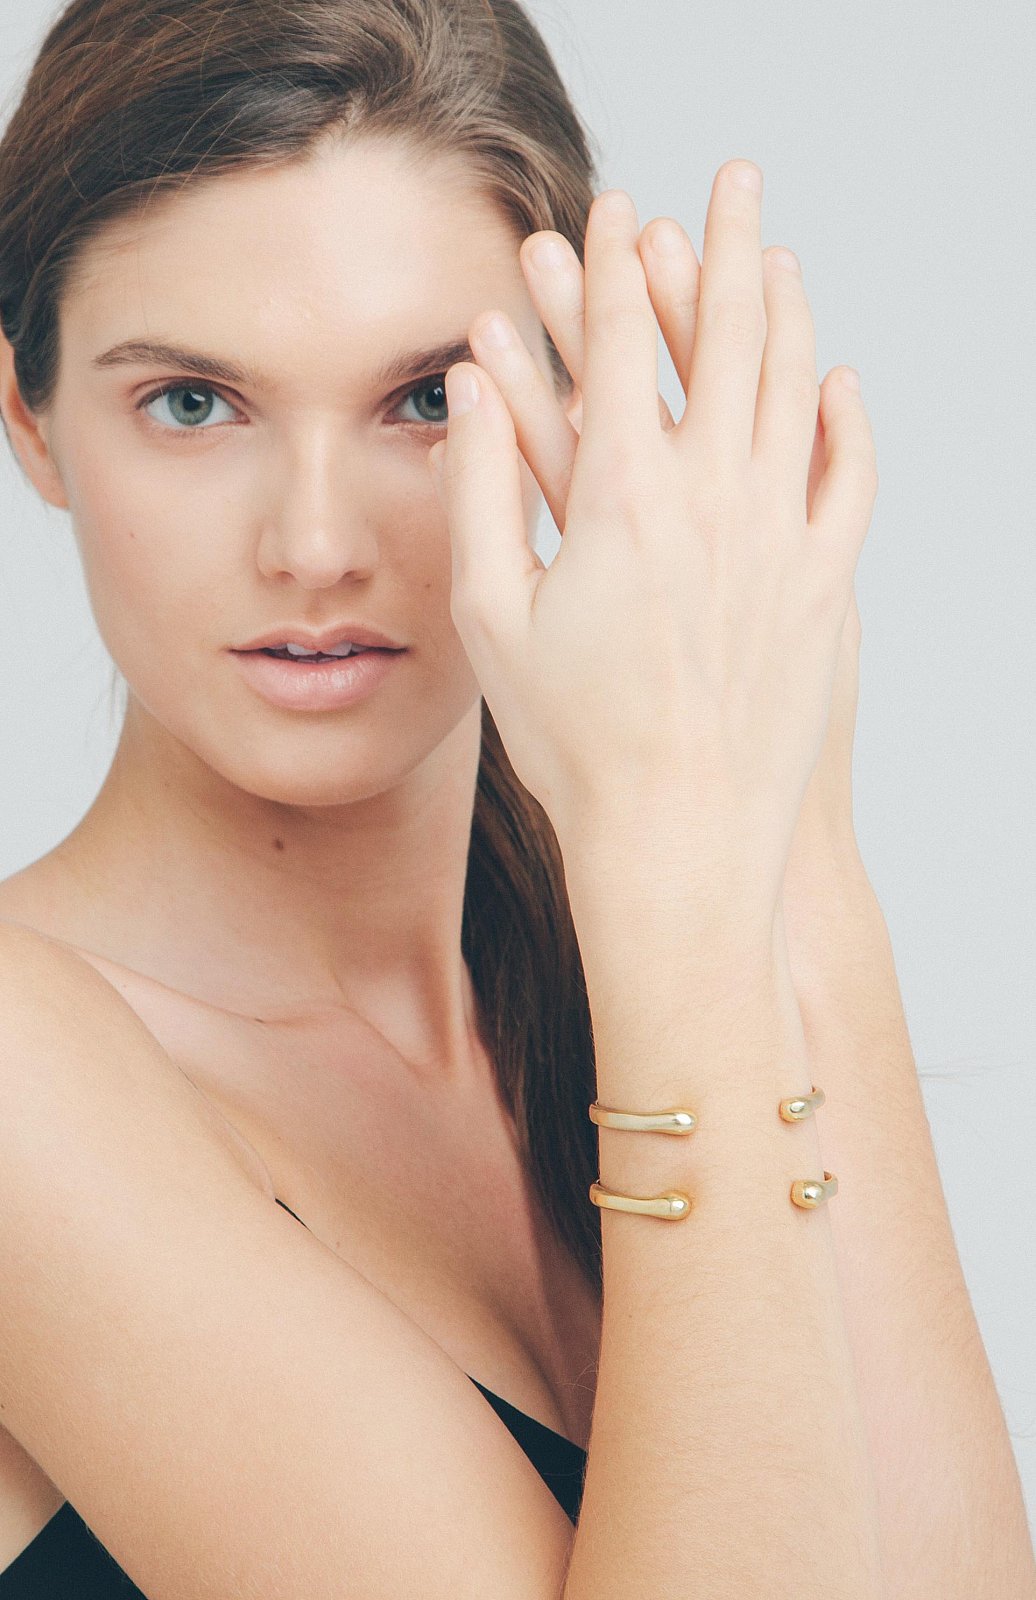 Actress Angie Harmon - Actress Angie Harmon Launches ‘X Red Earth’ Jewelry Collection